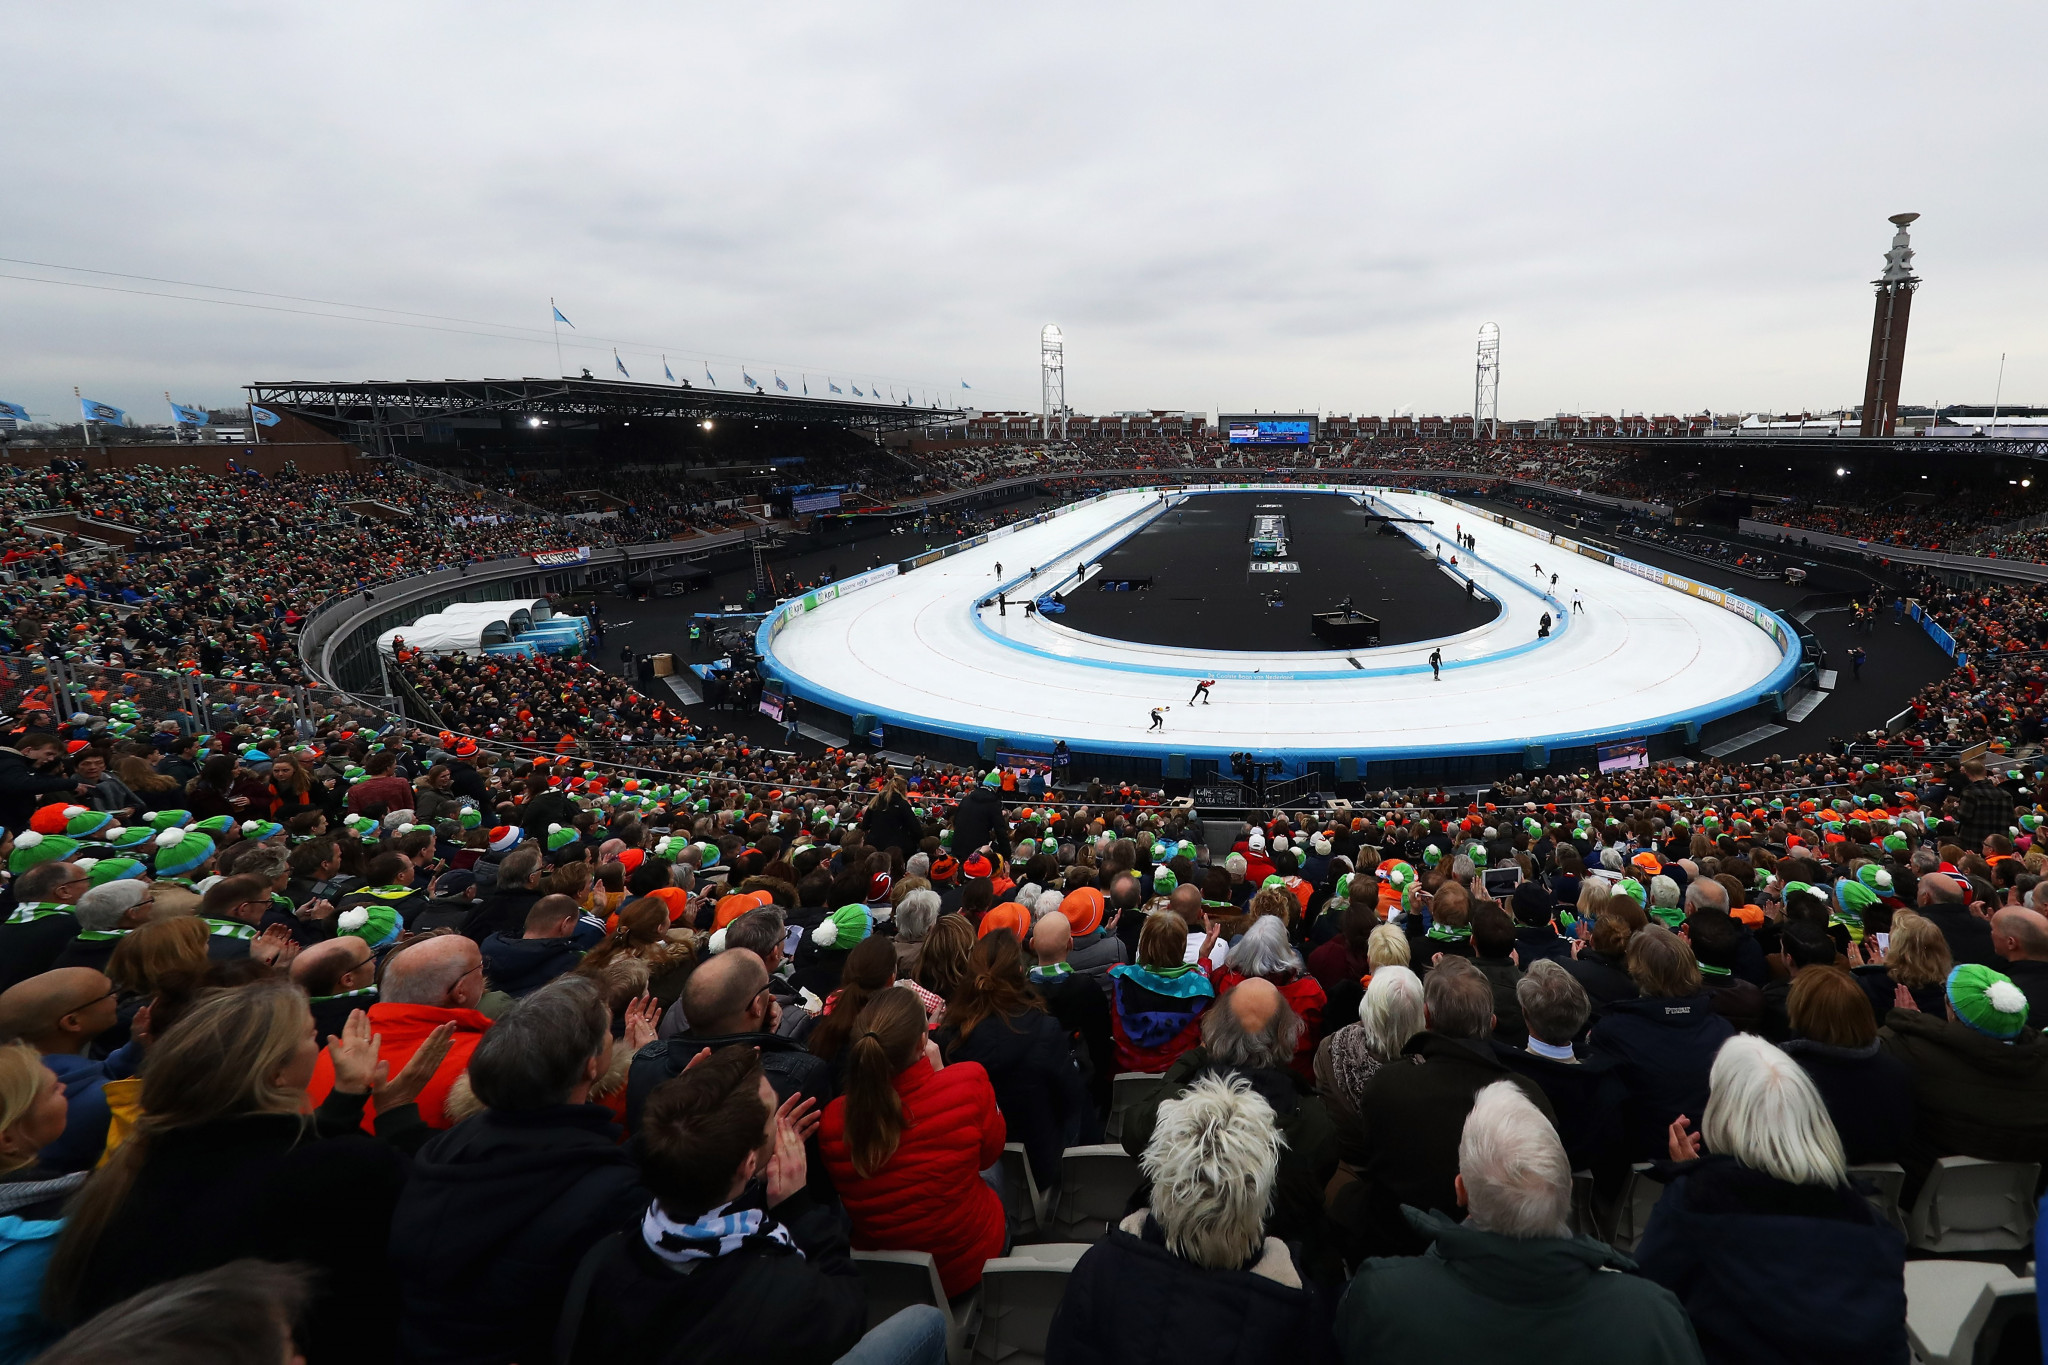 The World Allround Speed Skating Championships took place in Amsterdam in 2018 ©ISU